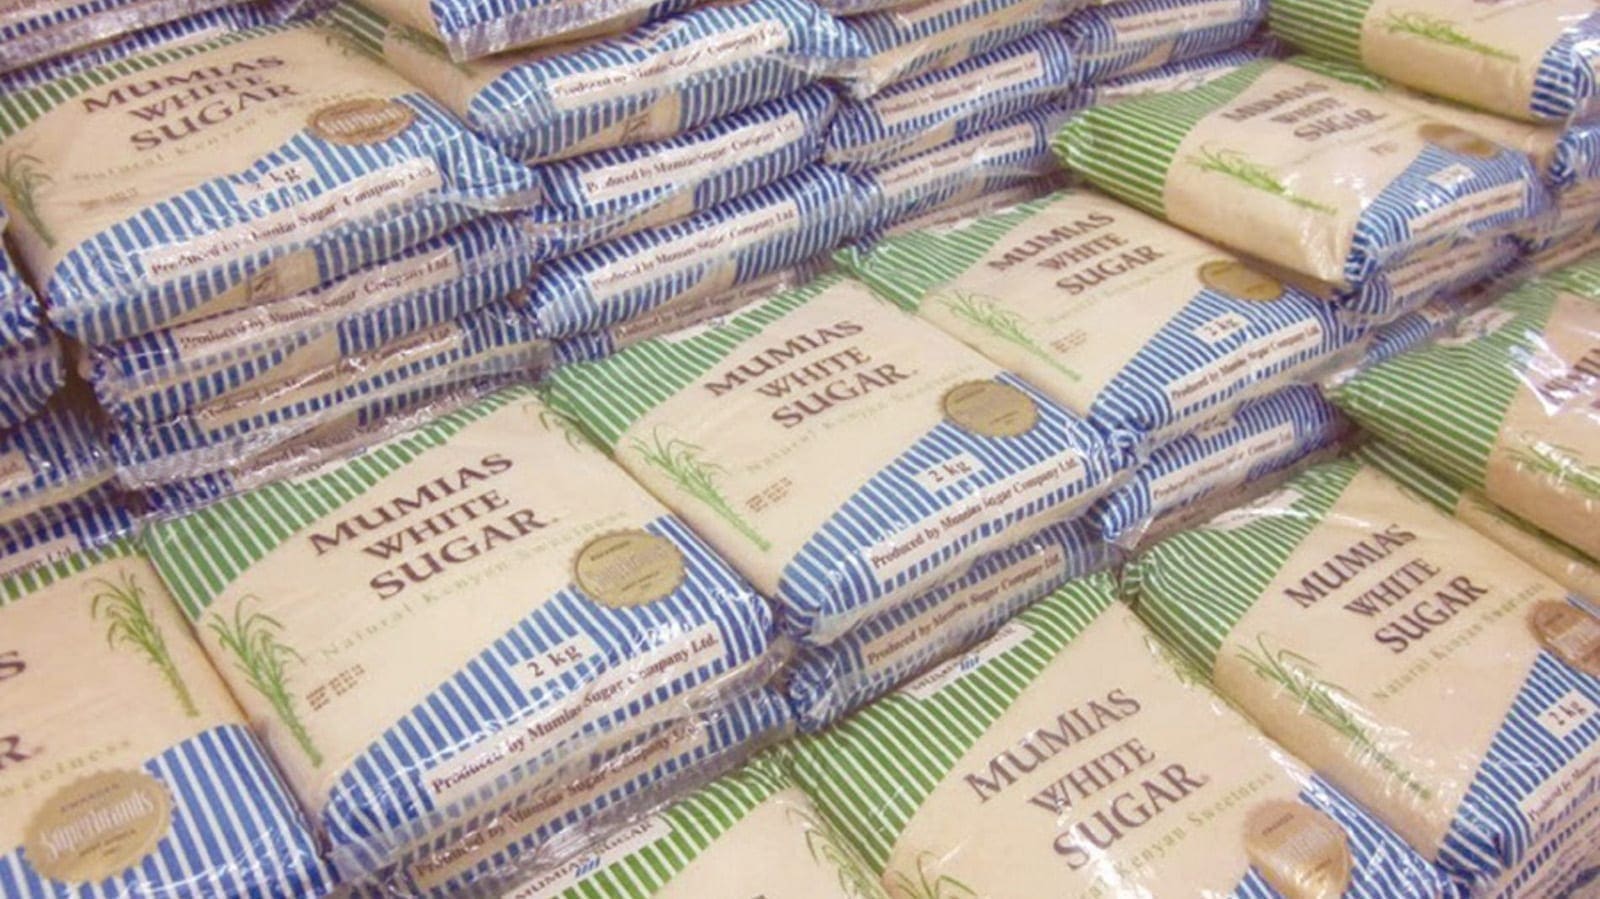 Set back on revival of ailing Mumias Sugar as High Court cancel lease deal to Sarrai Group